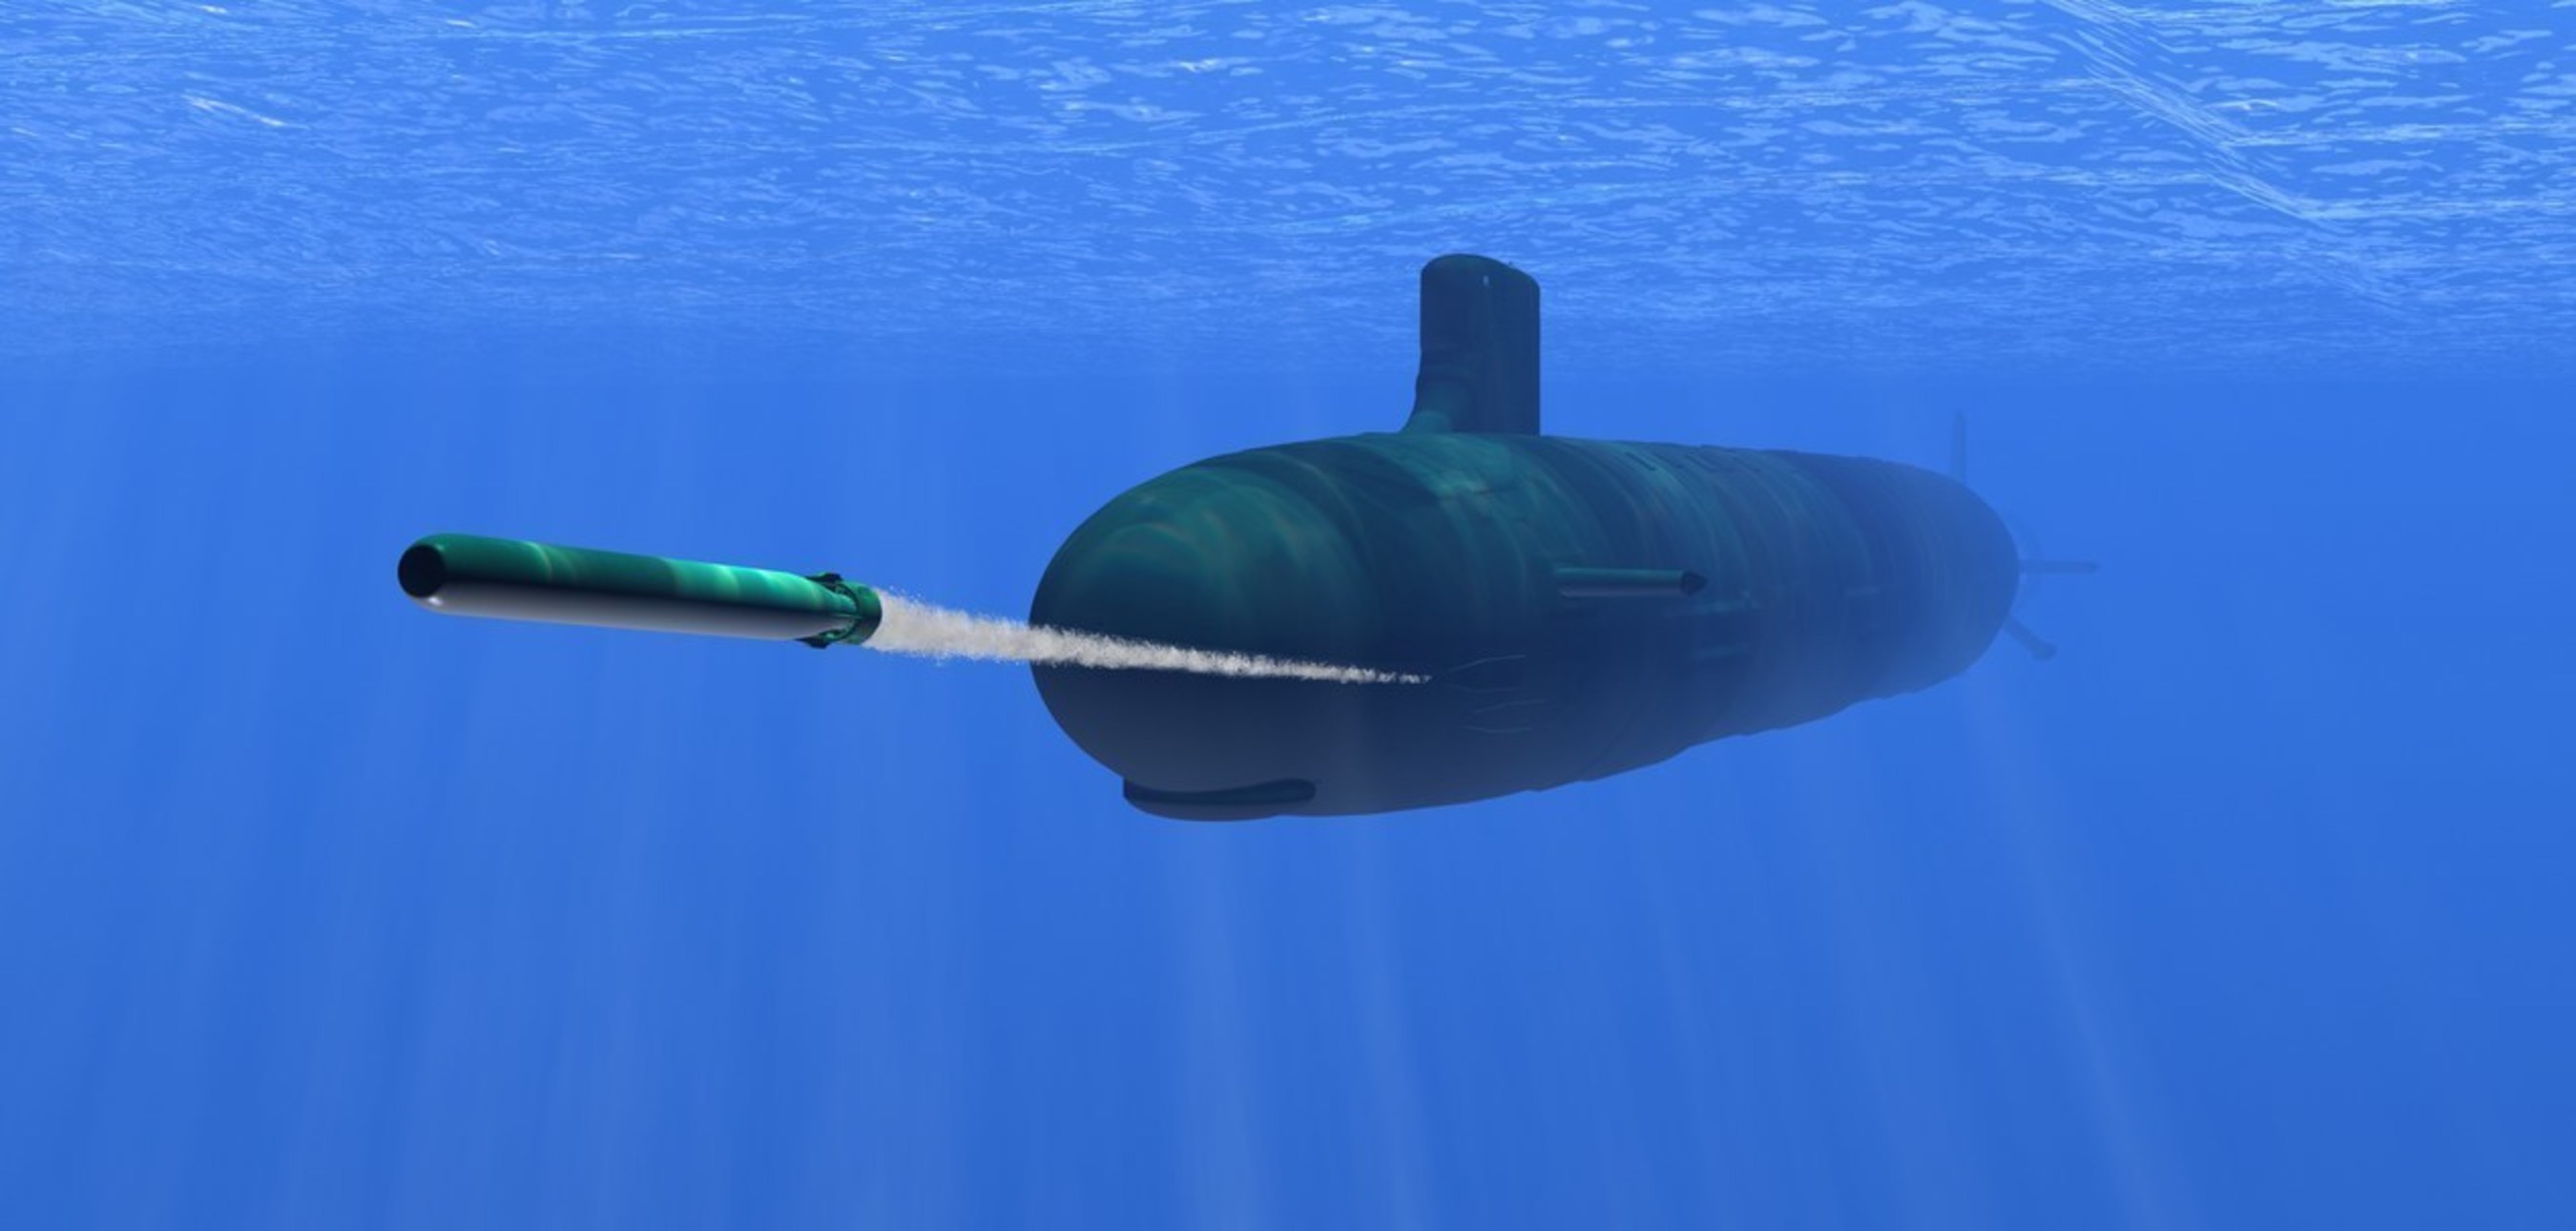 Lockheed Martin will provide fully integrated guidance and control sections to increase the inventory of MK 48 Mod 7 torpedoes. The MK 48 torpedo is used by all classes of submarines as their anti-submarine warfare (ASW) and anti-surface warfare (ASuW) weapon. Photo courtesy Lockheed Martin.